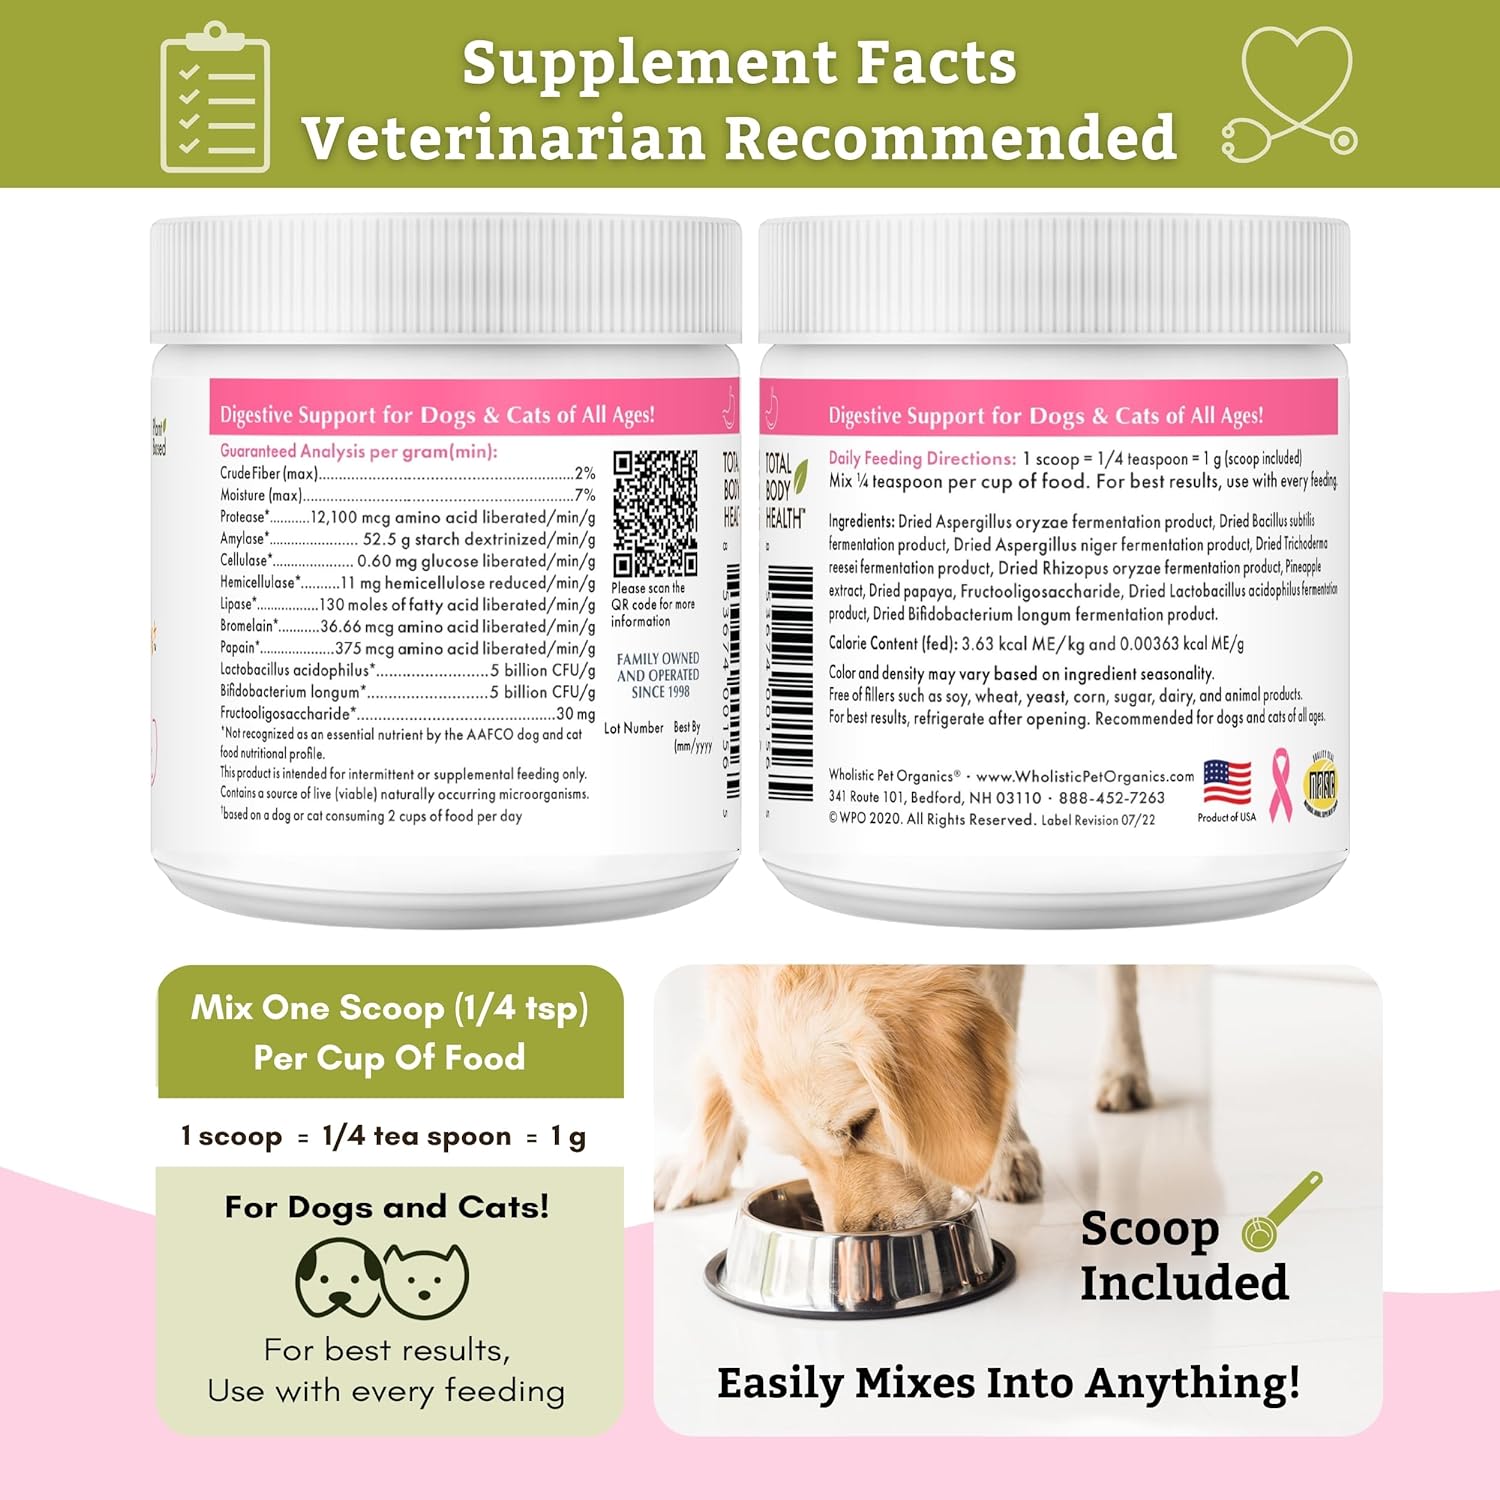 Wholistic Pet Organics: Dog Probiotics and Digestive Enzymes Powder - 4 oz - Dog Digestive Support Supplement Prevents Upset Stomach Gut Health - Digest All Probiotics for Dogs and Cats Stool : Pet Probiotic Nutritional Supplements : Pet Supplies